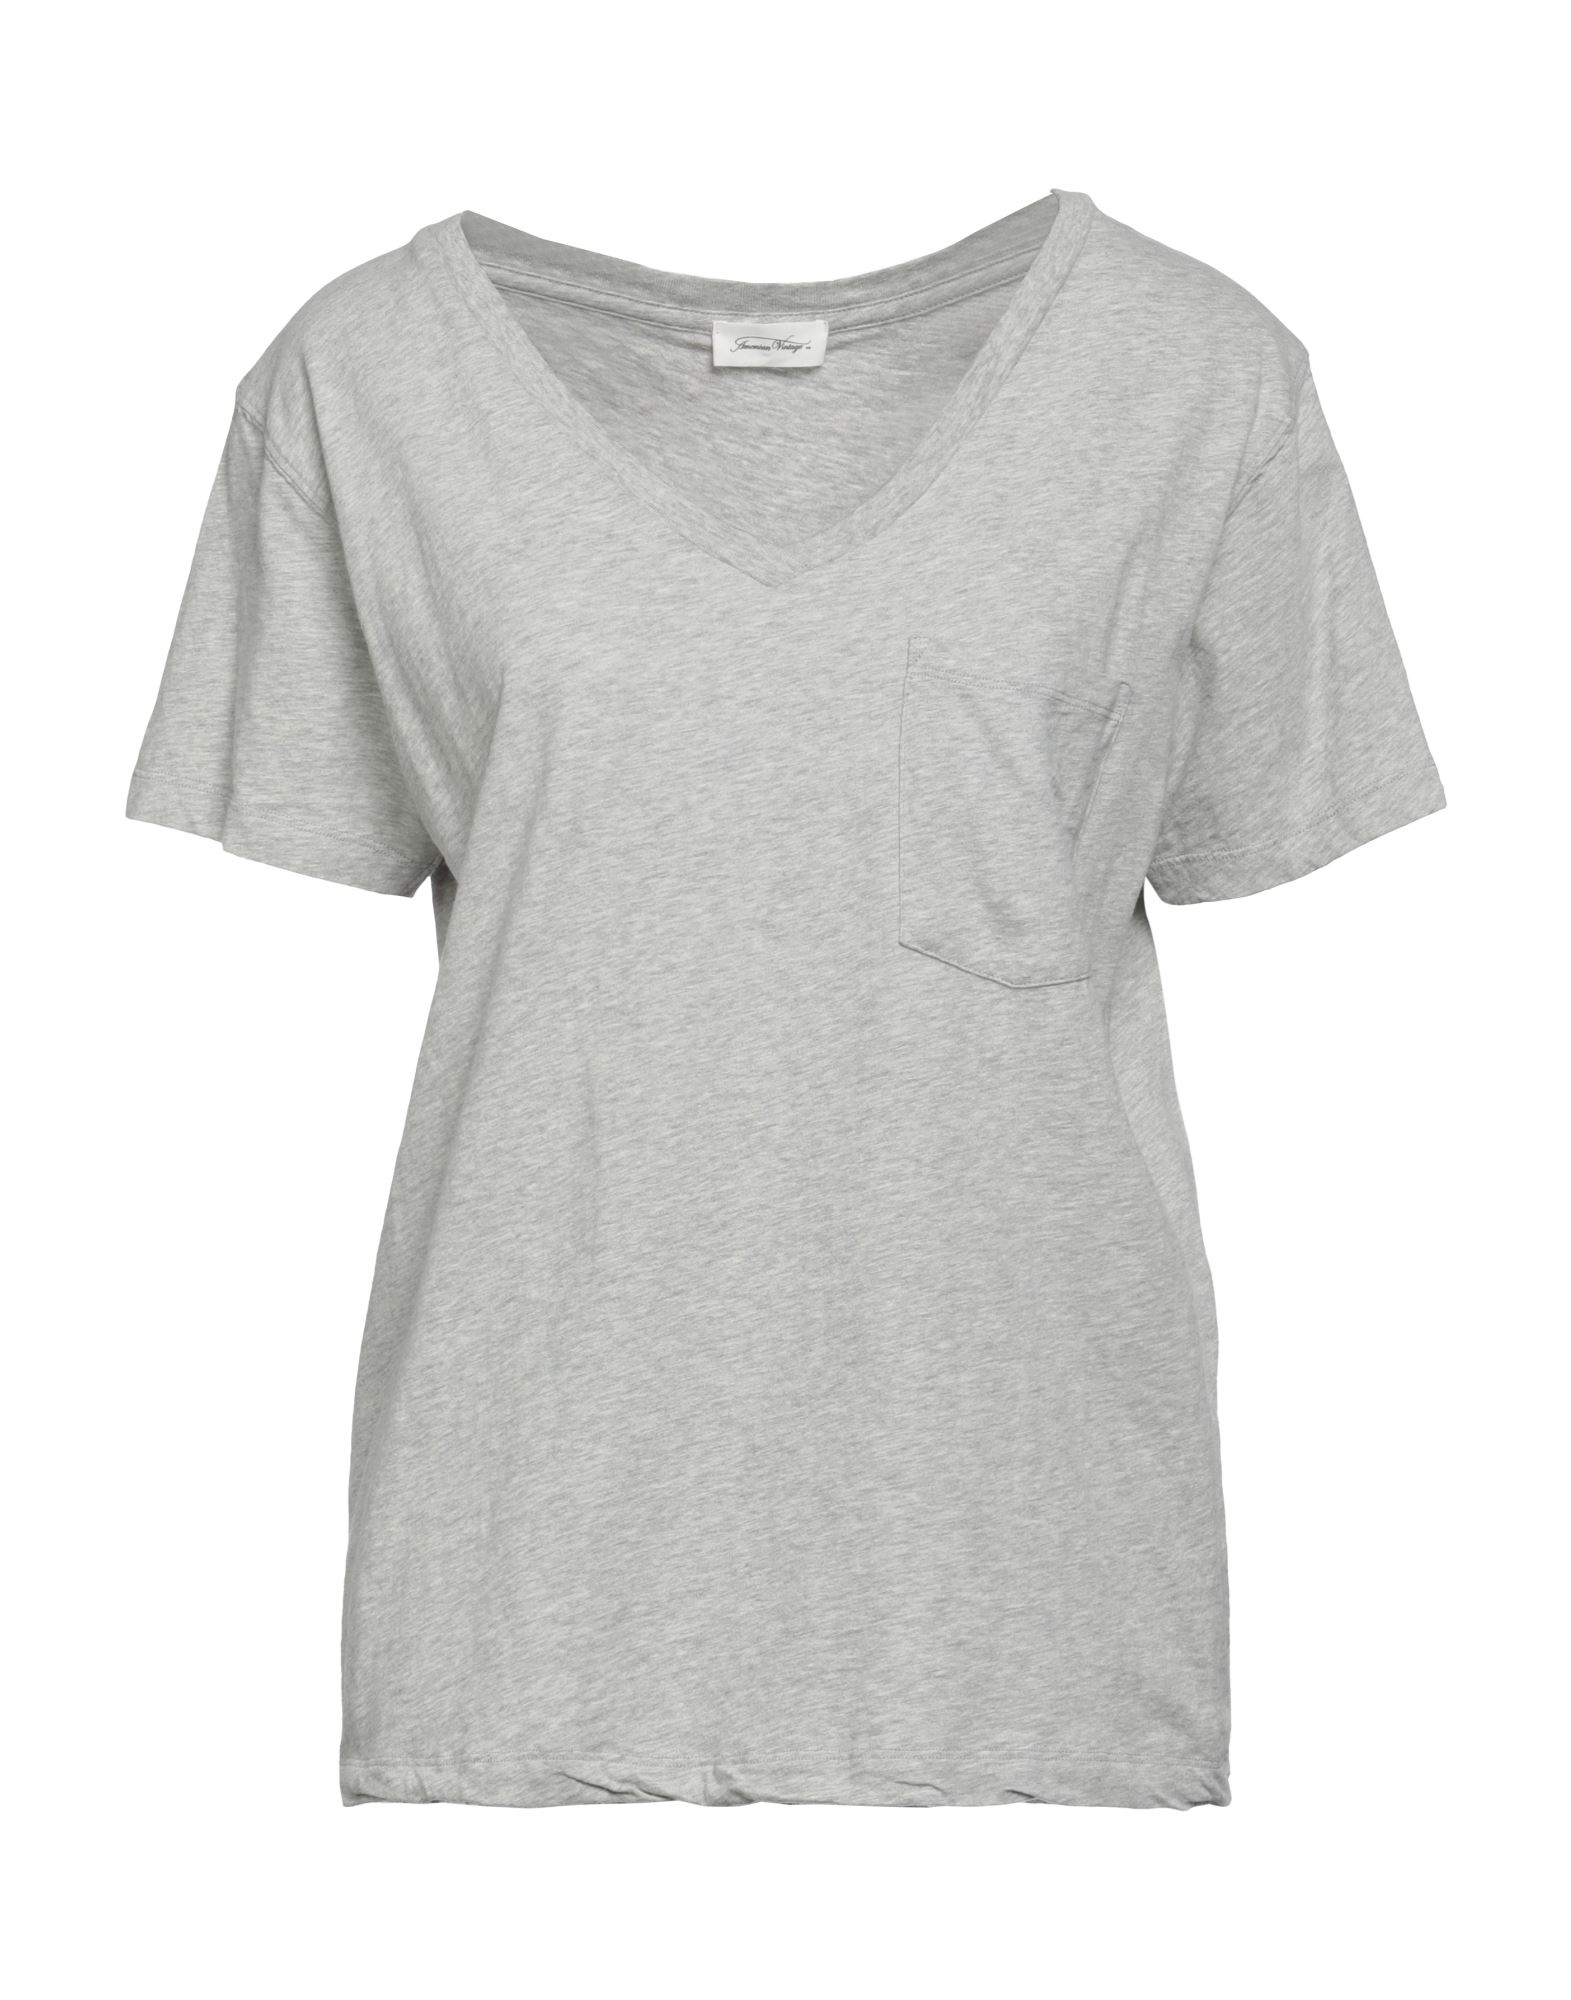 American Vintage T-shirts In Light Grey